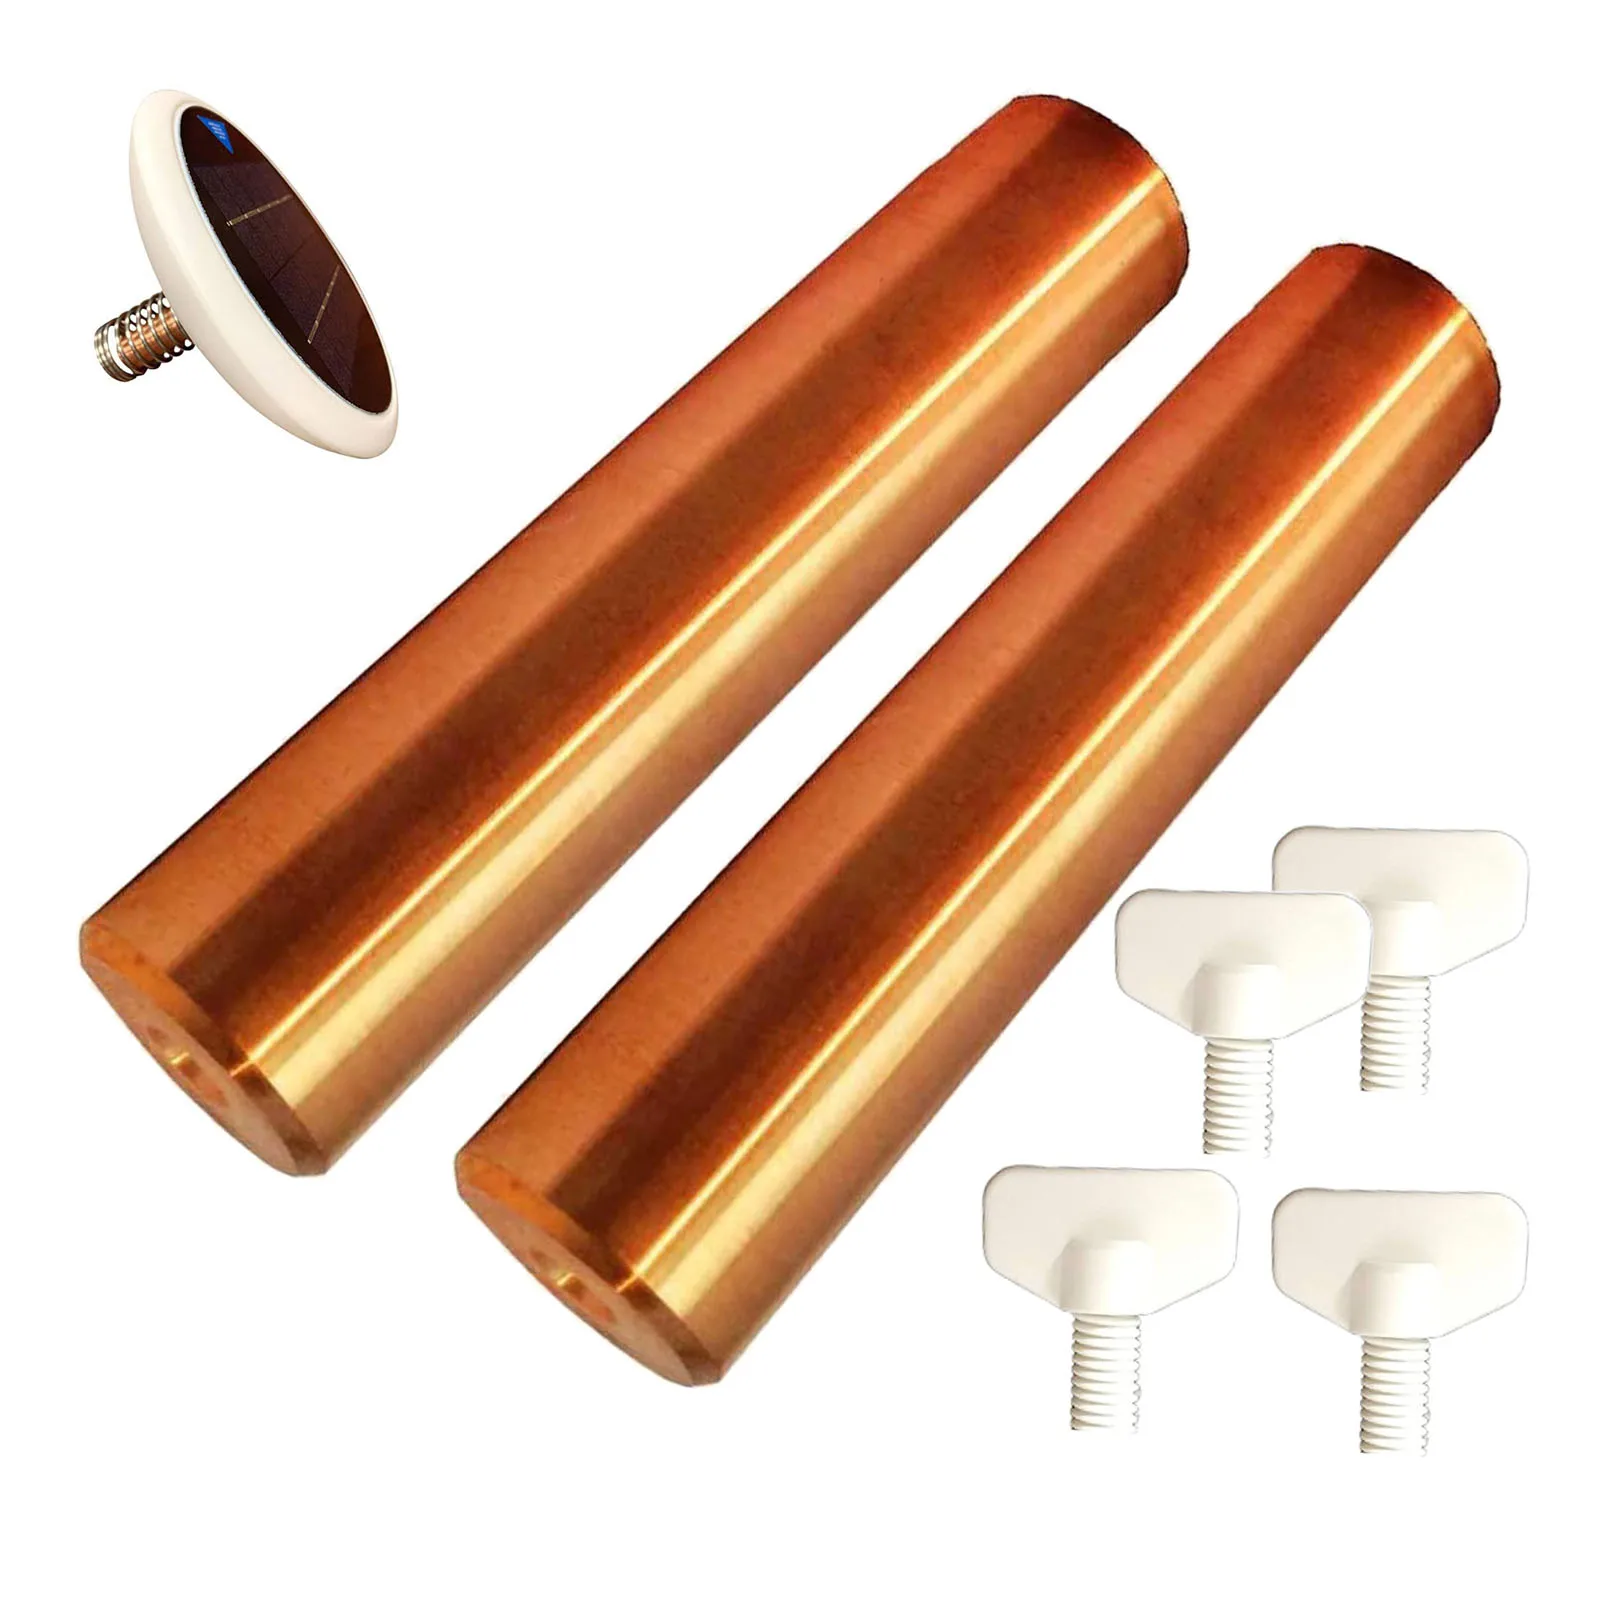 2Pcs Solar Copper Anode Set for Solar Pool Ionizer Algae Resistance Hot Tub Water Purifier Chlorine-Free Swimming Pool Cleaning